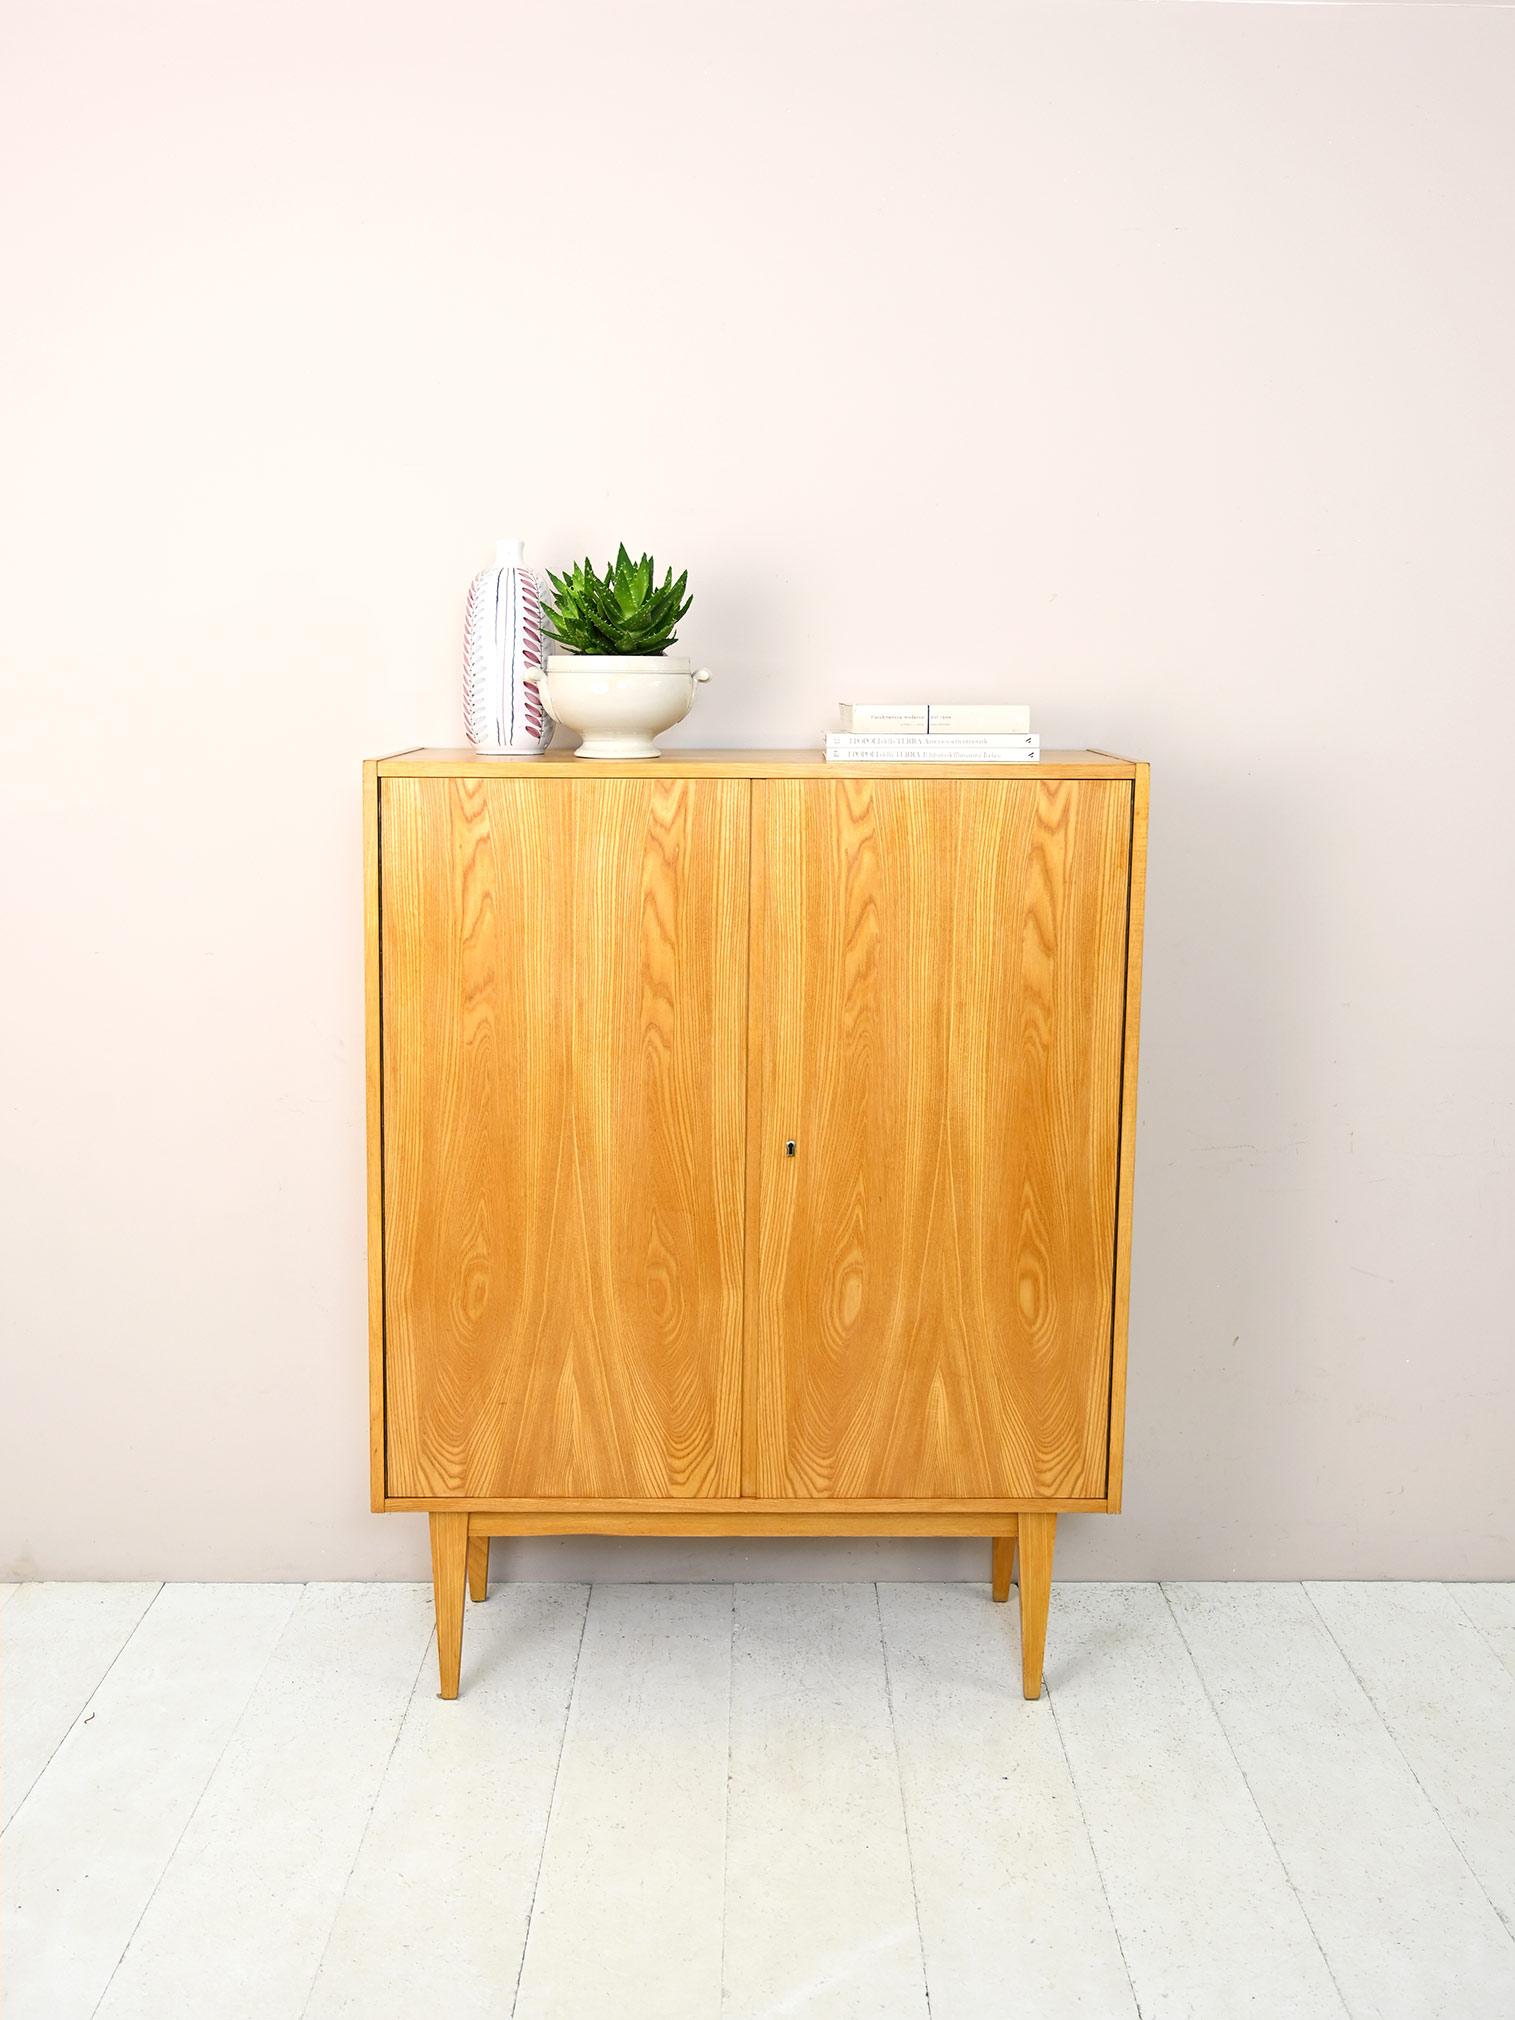 Scandinavian vintage modernism cabinet.
This retro-flavored cabinet features simple and elegant lines.
It consists of a storage compartment closed by lockable hinged doors.
Tapered legs lighten the structure.
Perfect as a document cabinet, but